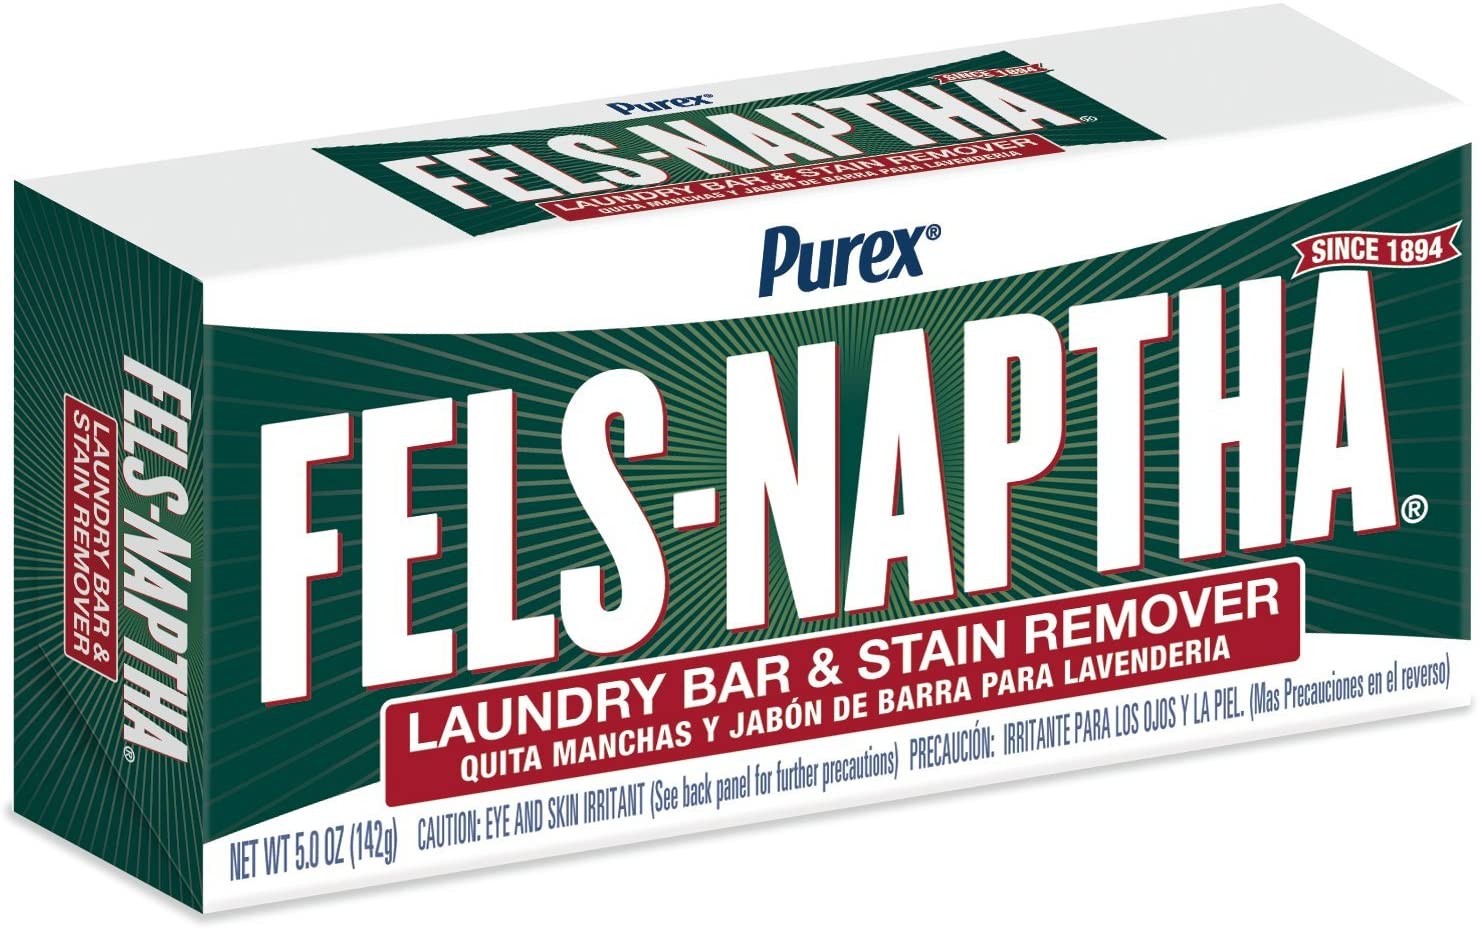 5-Oz Fels-Naptha Laundry Bar and Stain Remover $0.85 w/ S&S + Free Shipping w/ Prime or $25+